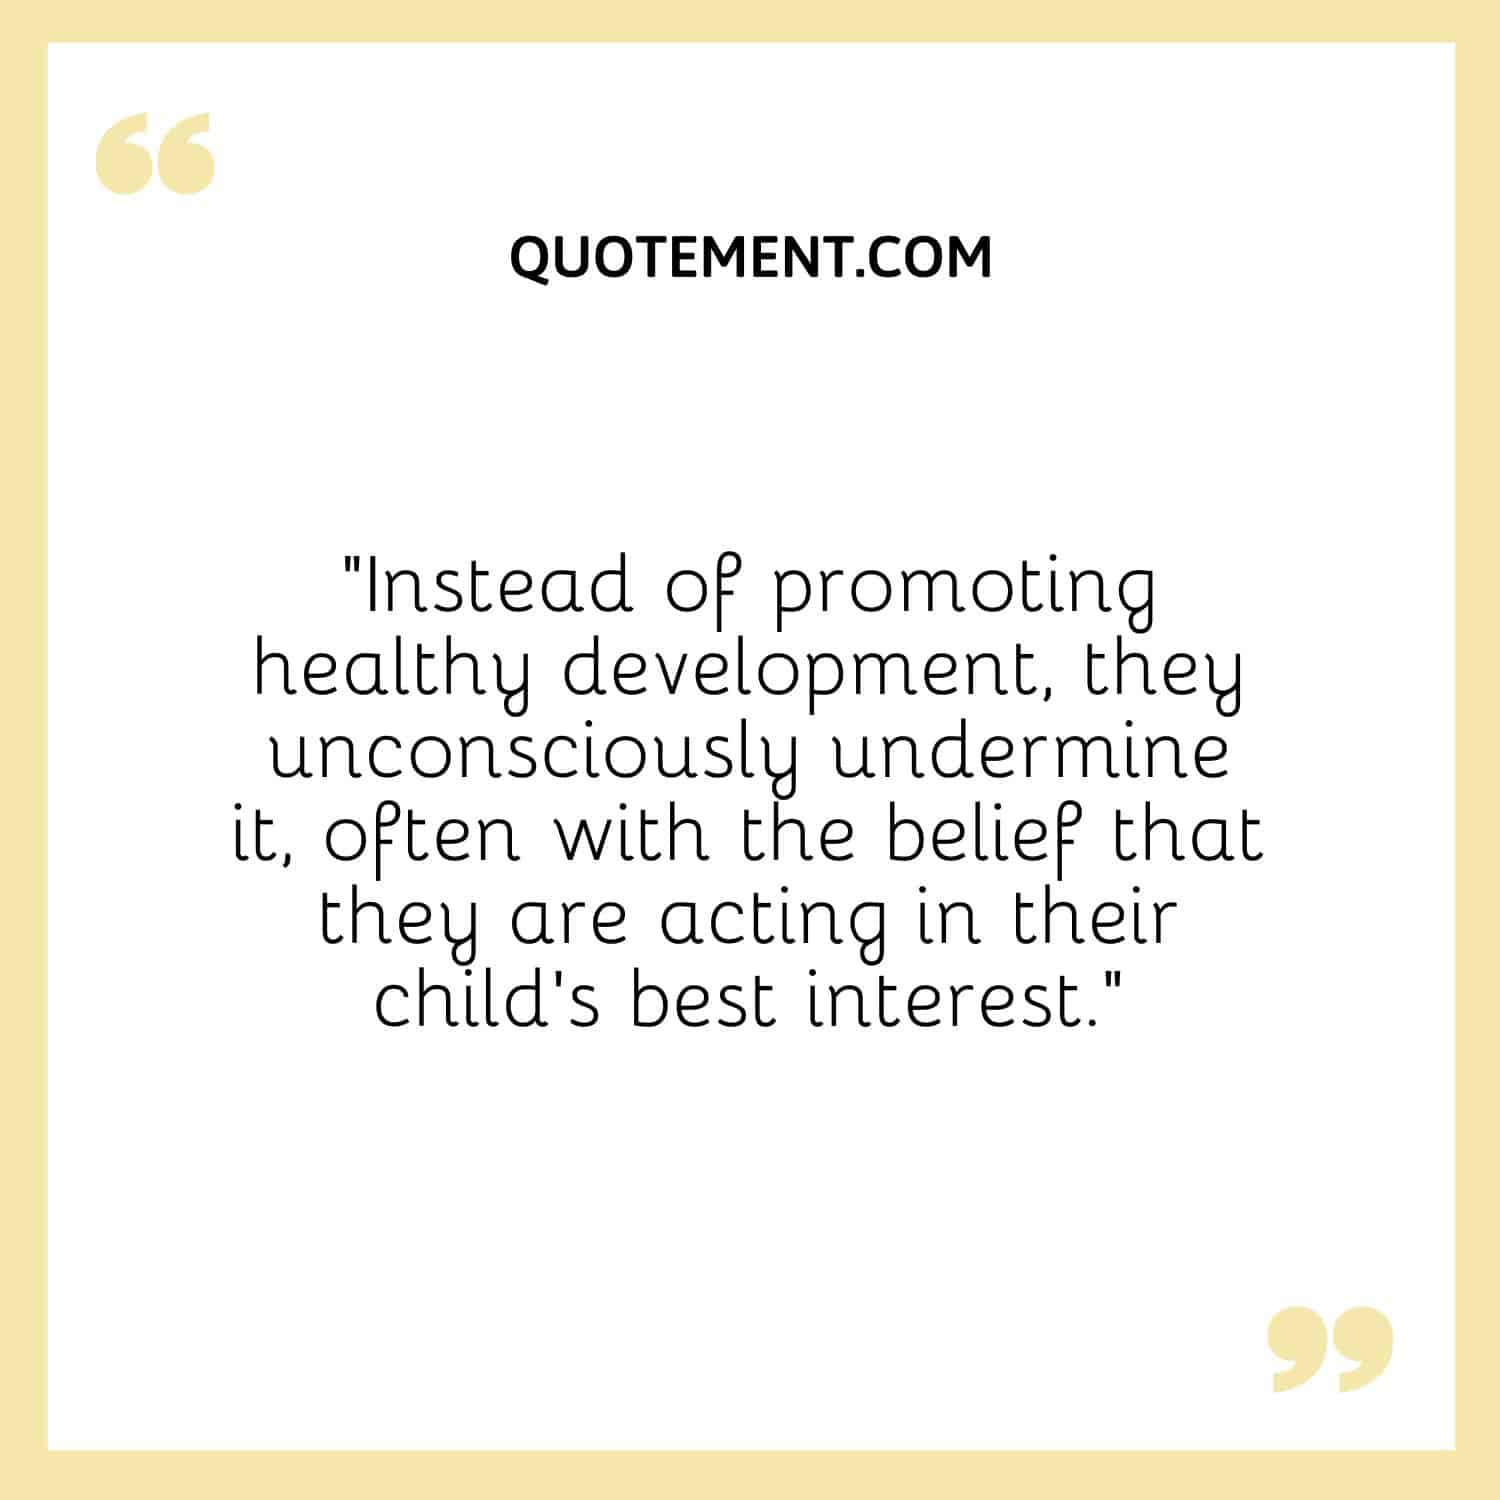 Instead of promoting healthy development, they unconsciously undermine it, often with the belief that they are acting in their child’s best interest